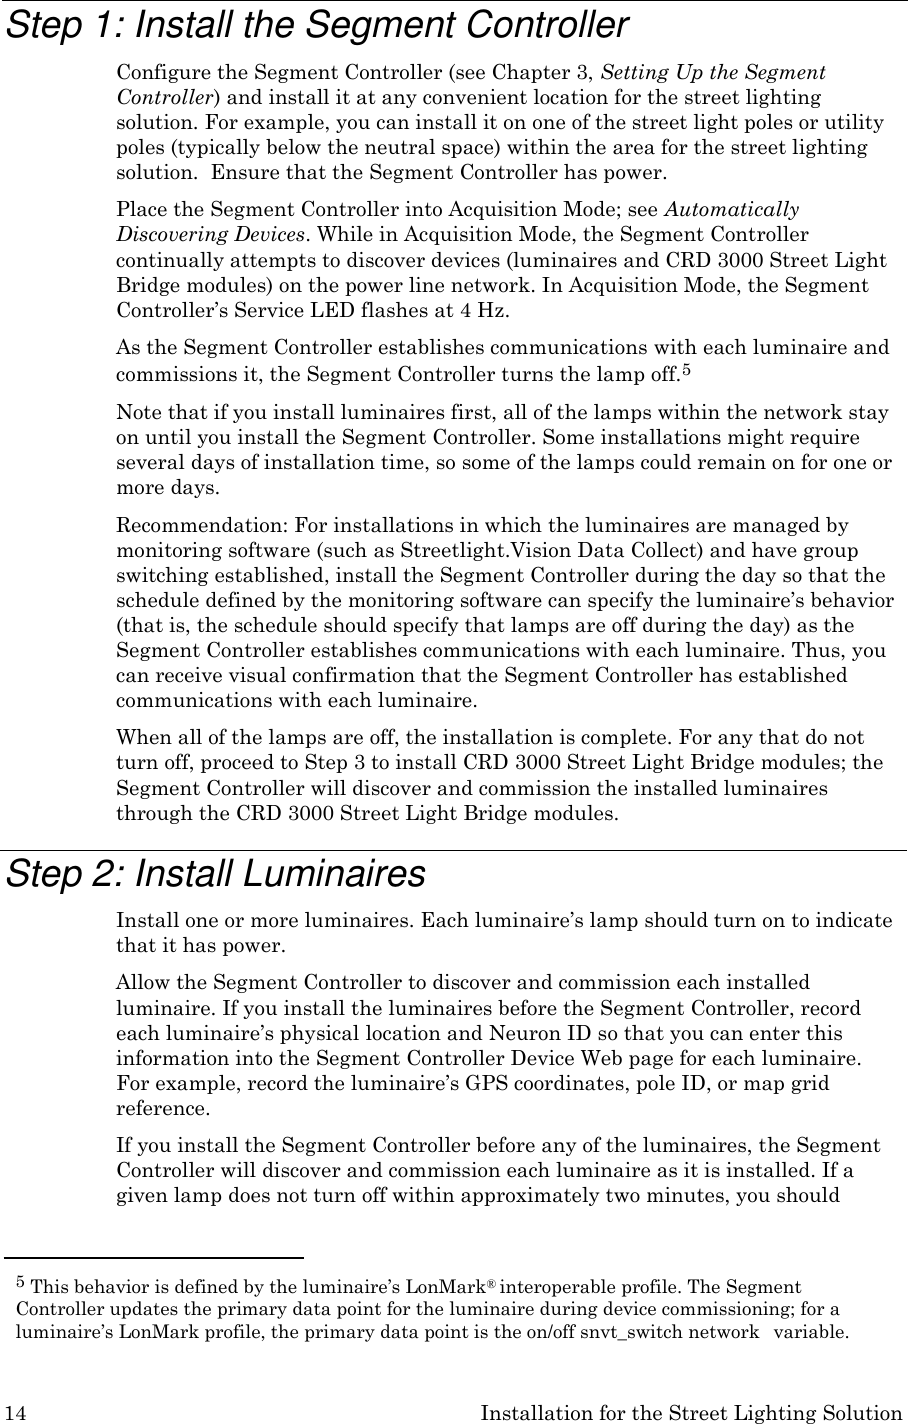 14 Installation for the Street Lighting Solution    Step 1: Install the Segment Controller Configure the Segment Controller (see Chapter 3, Setting Up the Segment Controller) and install it at any convenient location for the street lighting solution. For example, you can install it on one of the street light poles or utility poles (typically below the neutral space) within the area for the street lighting solution.  Ensure that the Segment Controller has power. Place the Segment Controller into Acquisition Mode; see Automatically Discovering Devices. While in Acquisition Mode, the Segment Controller continually attempts to discover devices (luminaires and CRD 3000 Street Light Bridge modules) on the power line network. In Acquisition Mode, the Segment Controller’s Service LED flashes at 4 Hz. As the Segment Controller establishes communications with each luminaire and commissions it, the Segment Controller turns the lamp off.5 Note that if you install luminaires first, all of the lamps within the network stay on until you install the Segment Controller. Some installations might require several days of installation time, so some of the lamps could remain on for one or more days. Recommendation: For installations in which the luminaires are managed by monitoring software (such as Streetlight.Vision Data Collect) and have group switching established, install the Segment Controller during the day so that the schedule defined by the monitoring software can specify the luminaire’s behavior (that is, the schedule should specify that lamps are off during the day) as the Segment Controller establishes communications with each luminaire. Thus, you can receive visual confirmation that the Segment Controller has established communications with each luminaire. When all of the lamps are off, the installation is complete. For any that do not turn off, proceed to Step 3 to install CRD 3000 Street Light Bridge modules; the Segment Controller will discover and commission the installed luminaires through the CRD 3000 Street Light Bridge modules.  Step 2: Install Luminaires Install one or more luminaires. Each luminaire’s lamp should turn on to indicate that it has power. Allow the Segment Controller to discover and commission each installed luminaire. If you install the luminaires before the Segment Controller, record each luminaire’s physical location and Neuron ID so that you can enter this information into the Segment Controller Device Web page for each luminaire. For example, record the luminaire’s GPS coordinates, pole ID, or map grid reference. If you install the Segment Controller before any of the luminaires, the Segment Controller will discover and commission each luminaire as it is installed. If a given lamp does not turn off within approximately two minutes, you should   5 This behavior is defined by the luminaire’s LonMark® interoperable profile. The Segment Controller updates the primary data point for the luminaire during device commissioning; for a luminaire’s LonMark profile, the primary data point is the on/off snvt_switch network   variable. 